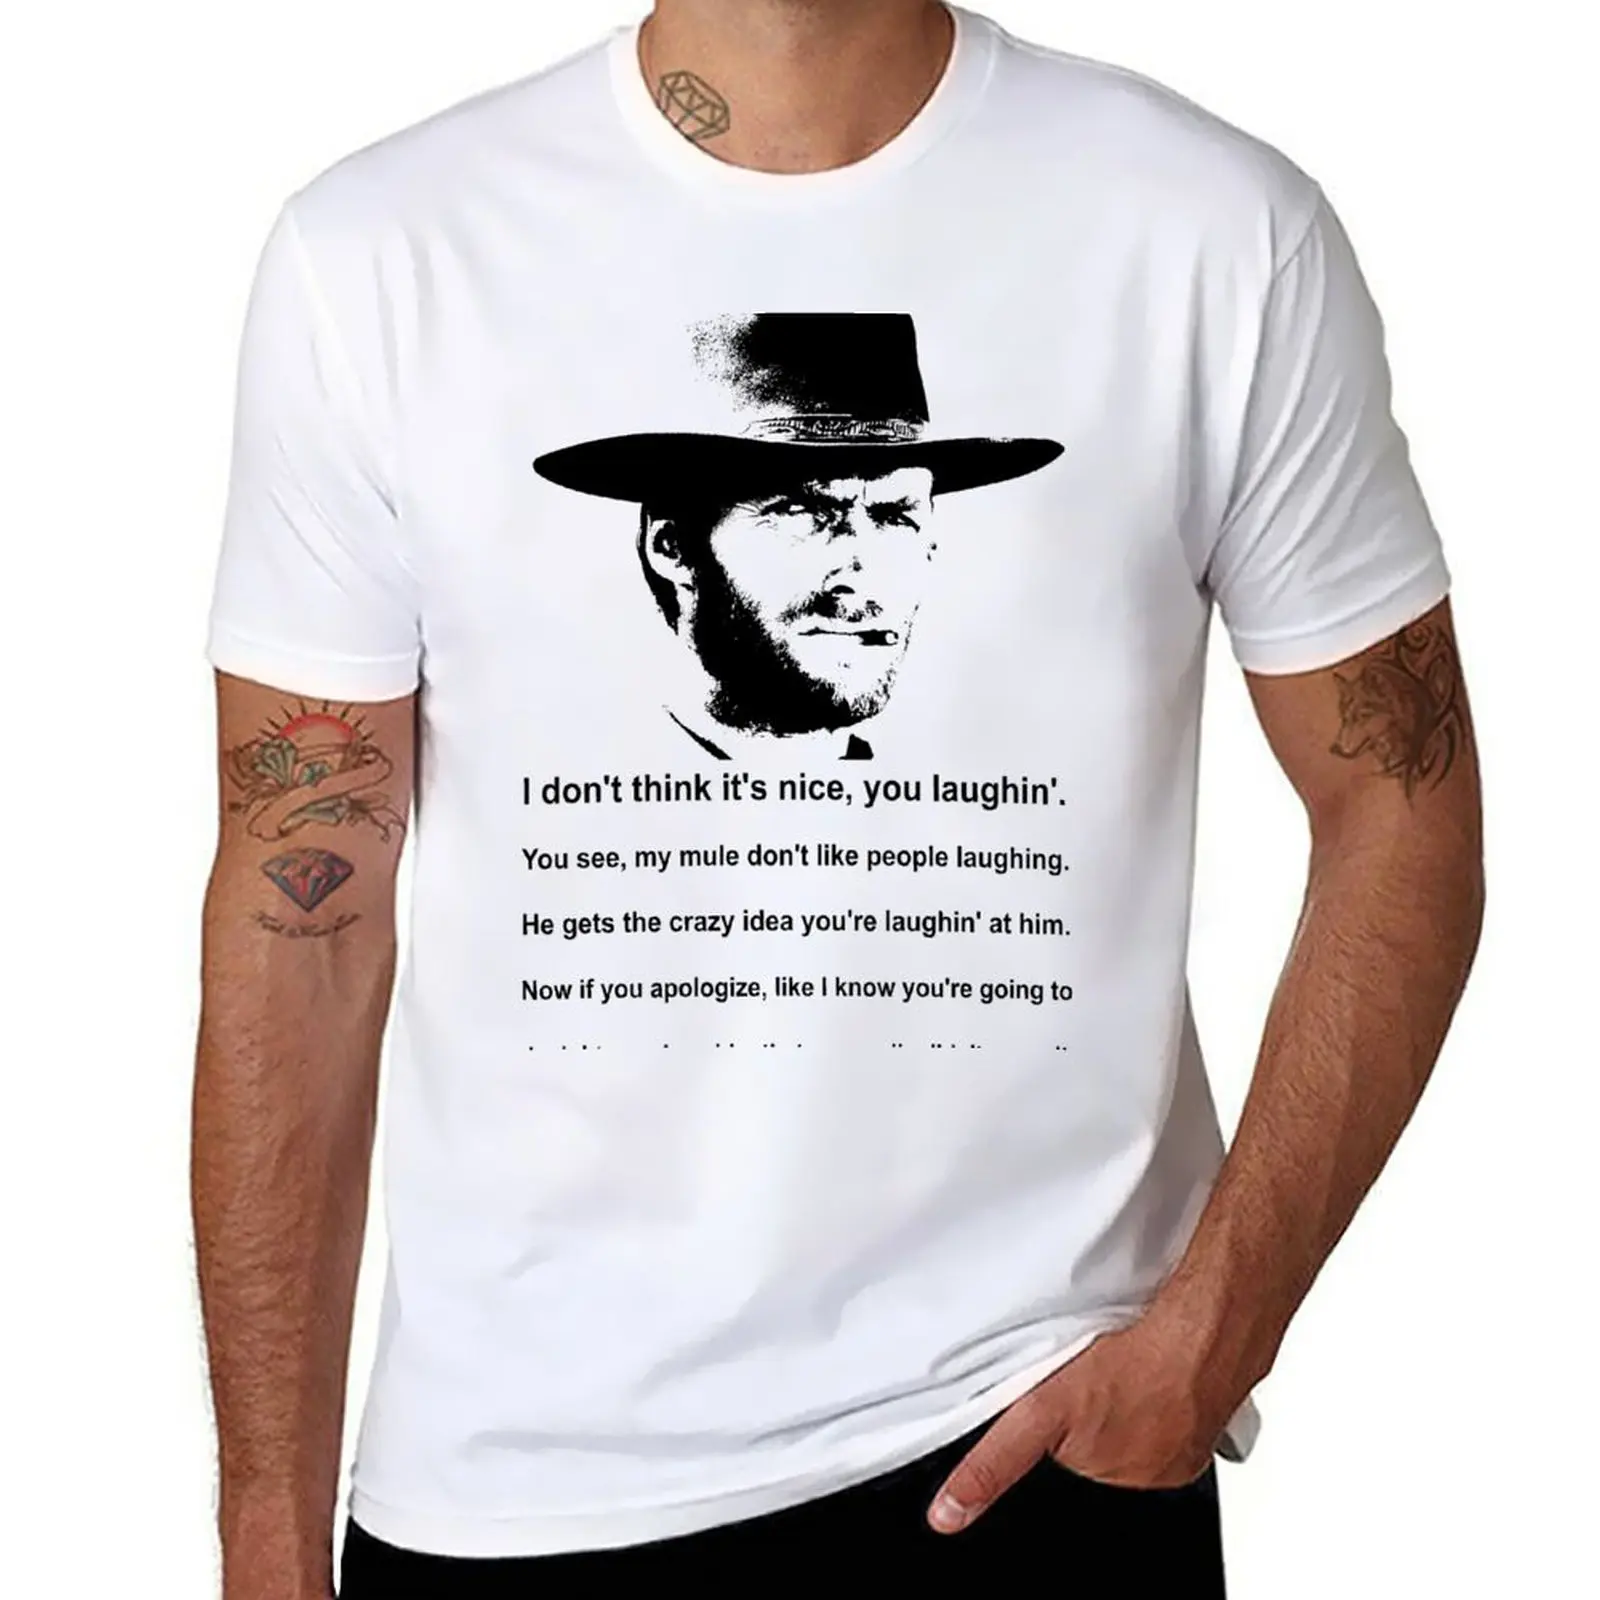 

New Clint Eastwood Mule Quote T-Shirt quick-drying t-shirt quick drying shirt sublime t shirt Men's t-shirt